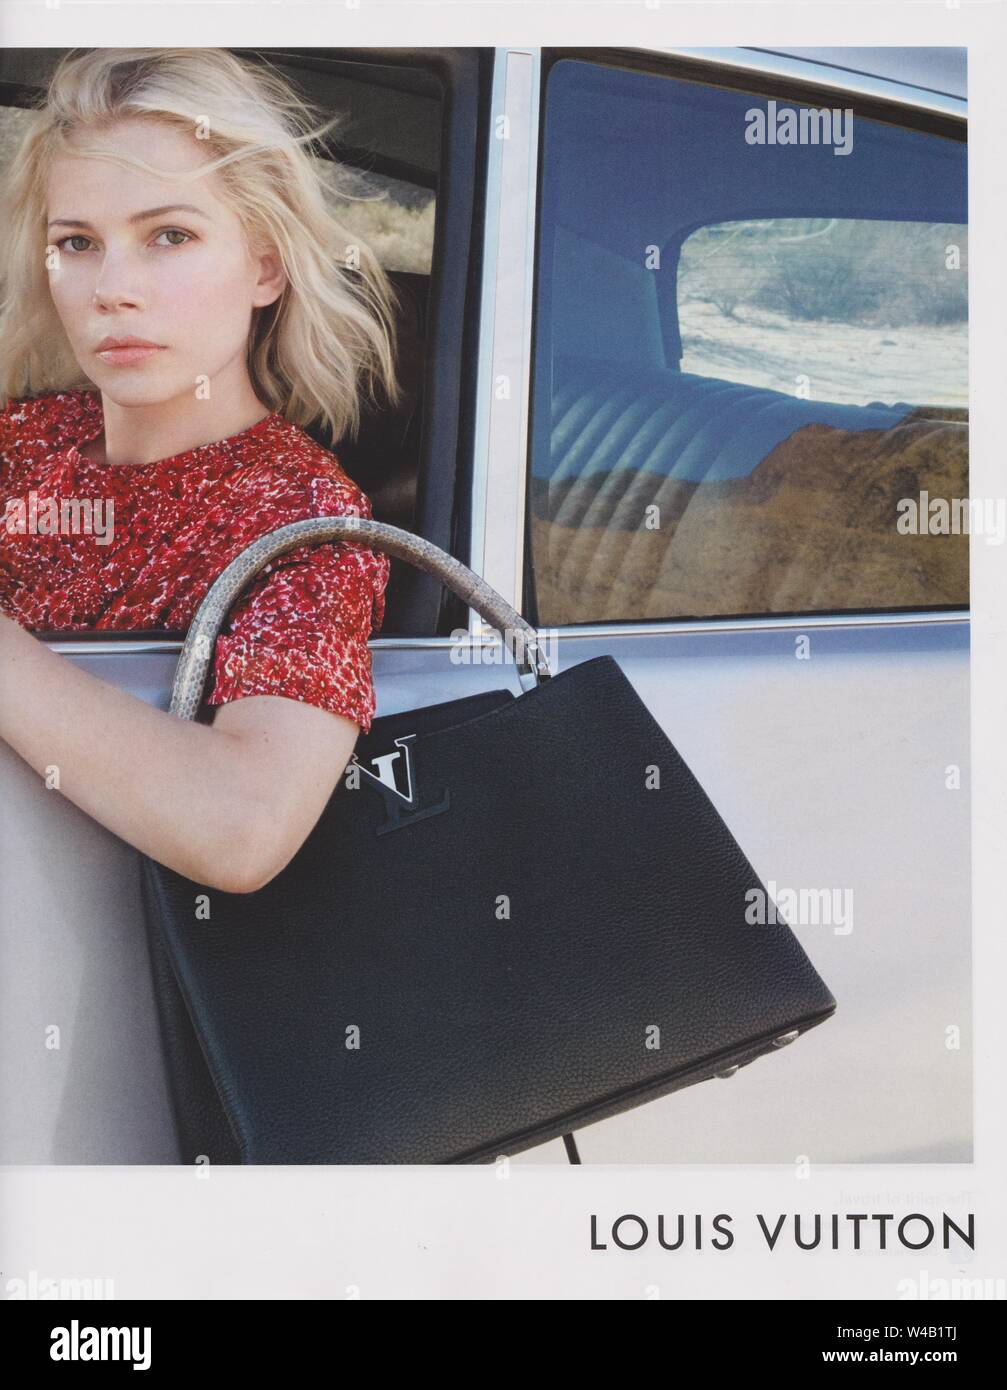 Louis Vuitton on X: Michelle Williams in the latest campaign from # LouisVuitton with the new Volta handbag  / X